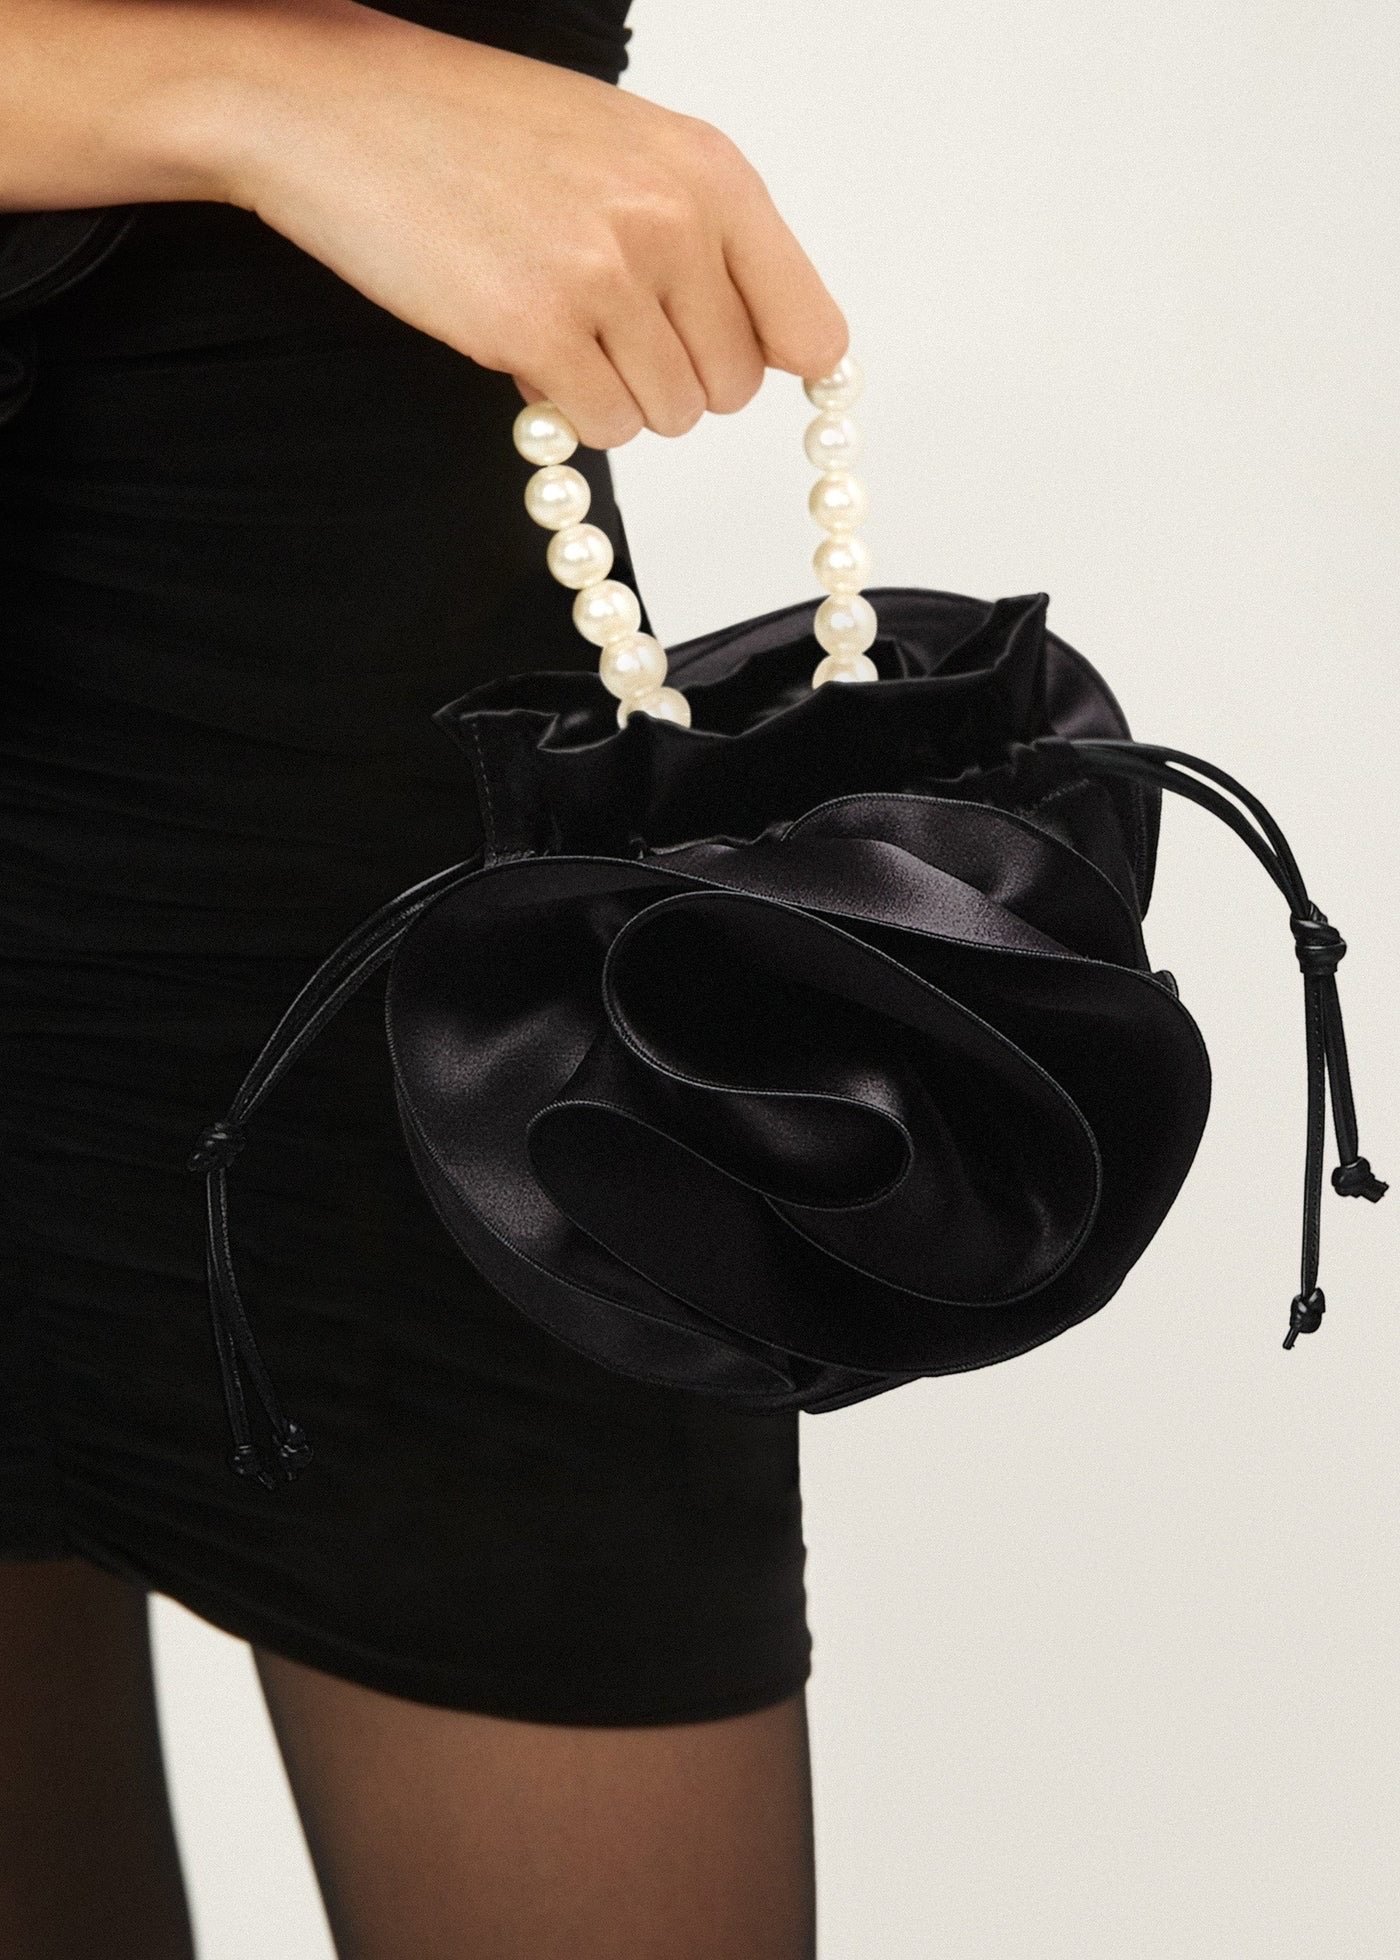 Discover the understated elegance of rose-shaped bags this spring, with unique creations from Burberry, Magda Butrym, and Thom Browne. These floral-inspired designs offer a refreshing twist to your evening essentials. Pictured: Pearl Magda bag in black satin, by Magda Butrym. Photos: Handout